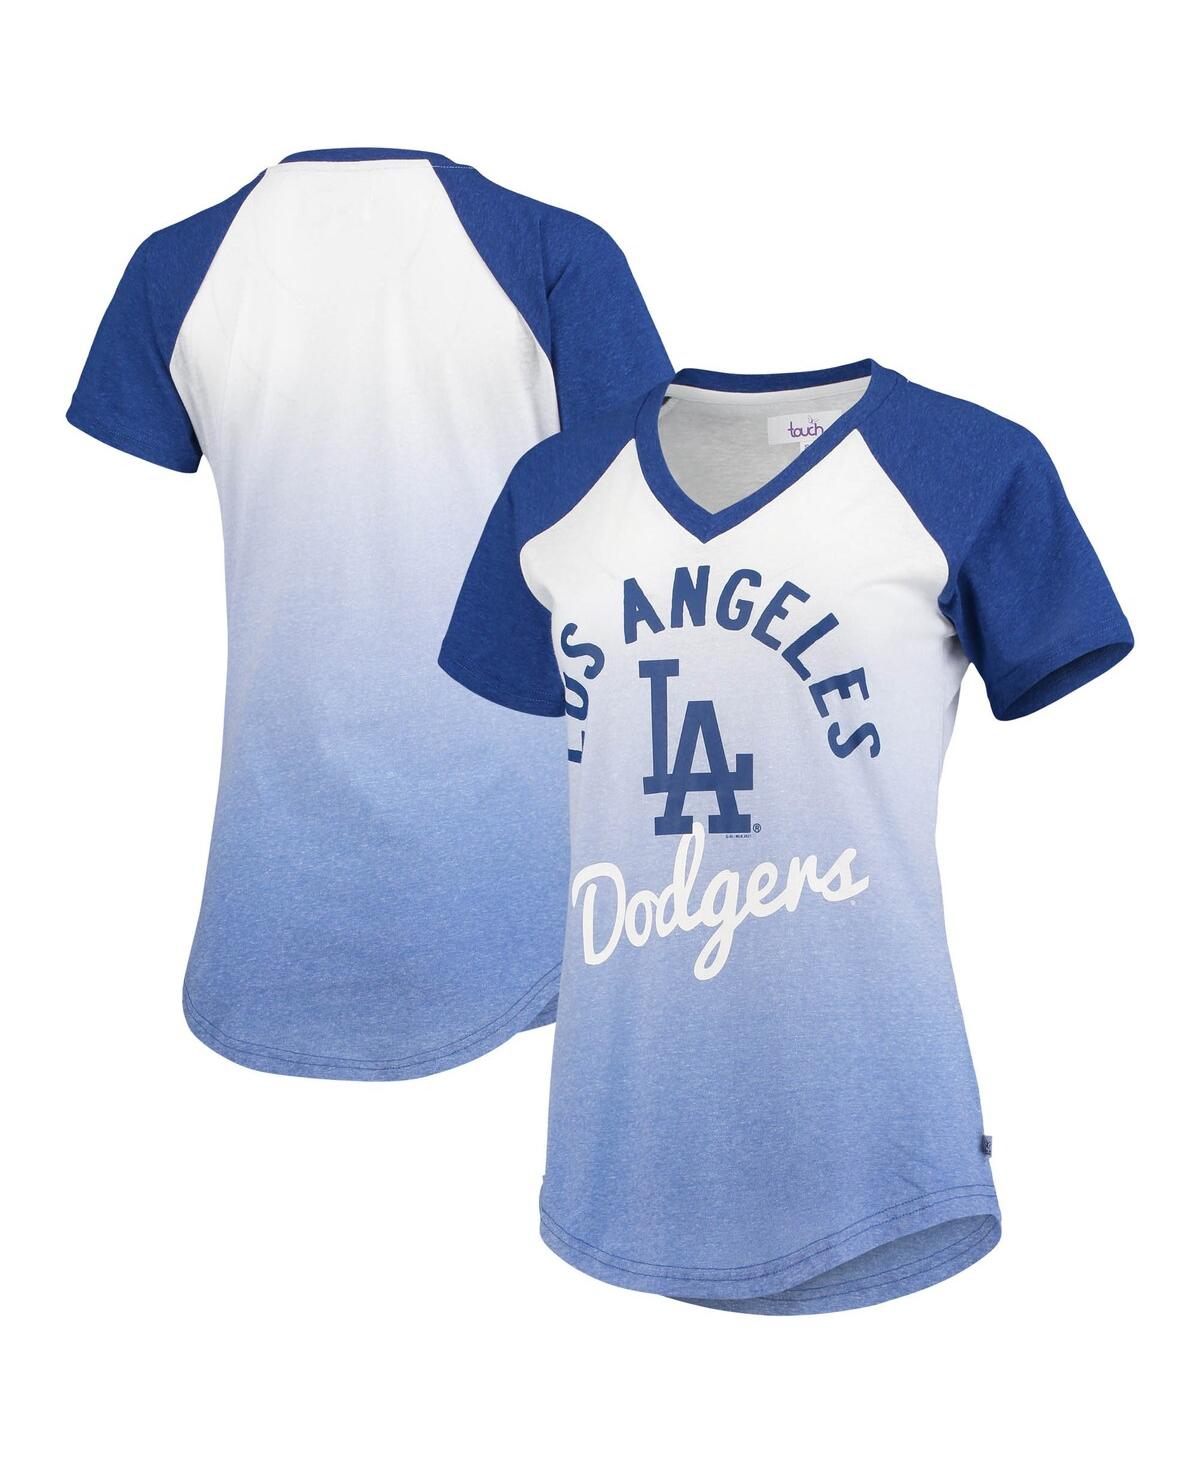 Touché Women's Royal And White Los Angeles Dodgers Shortstop Ombre Raglan V-neck T-shirt In Royal,white